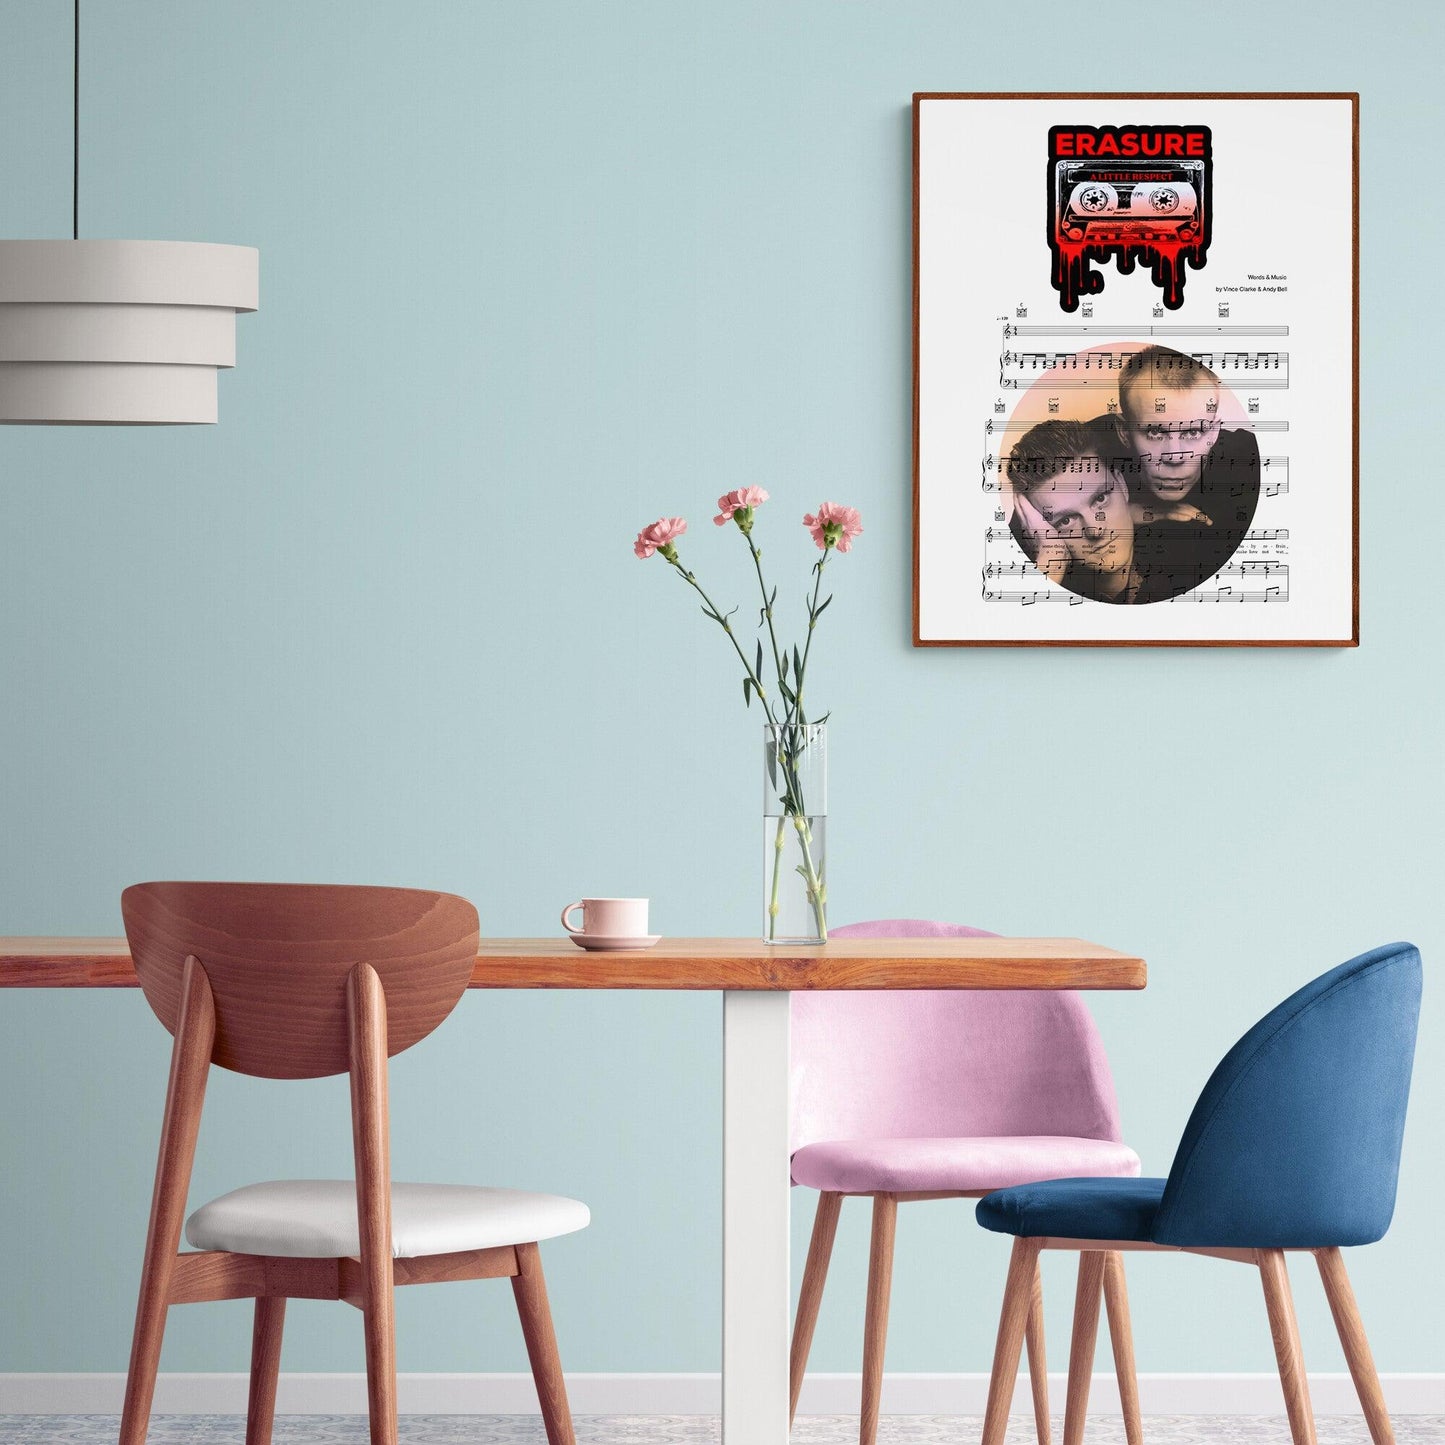 Created with archival inks and top-grade poster material, this Erasure - A Little Respect Poster resists fading and ensures longevity. Its classic album cover and bright colors bring life to the artwork, while its custom song lyrics evoke nostalgia. Hang this timeless piece to add a musical touch to any space.